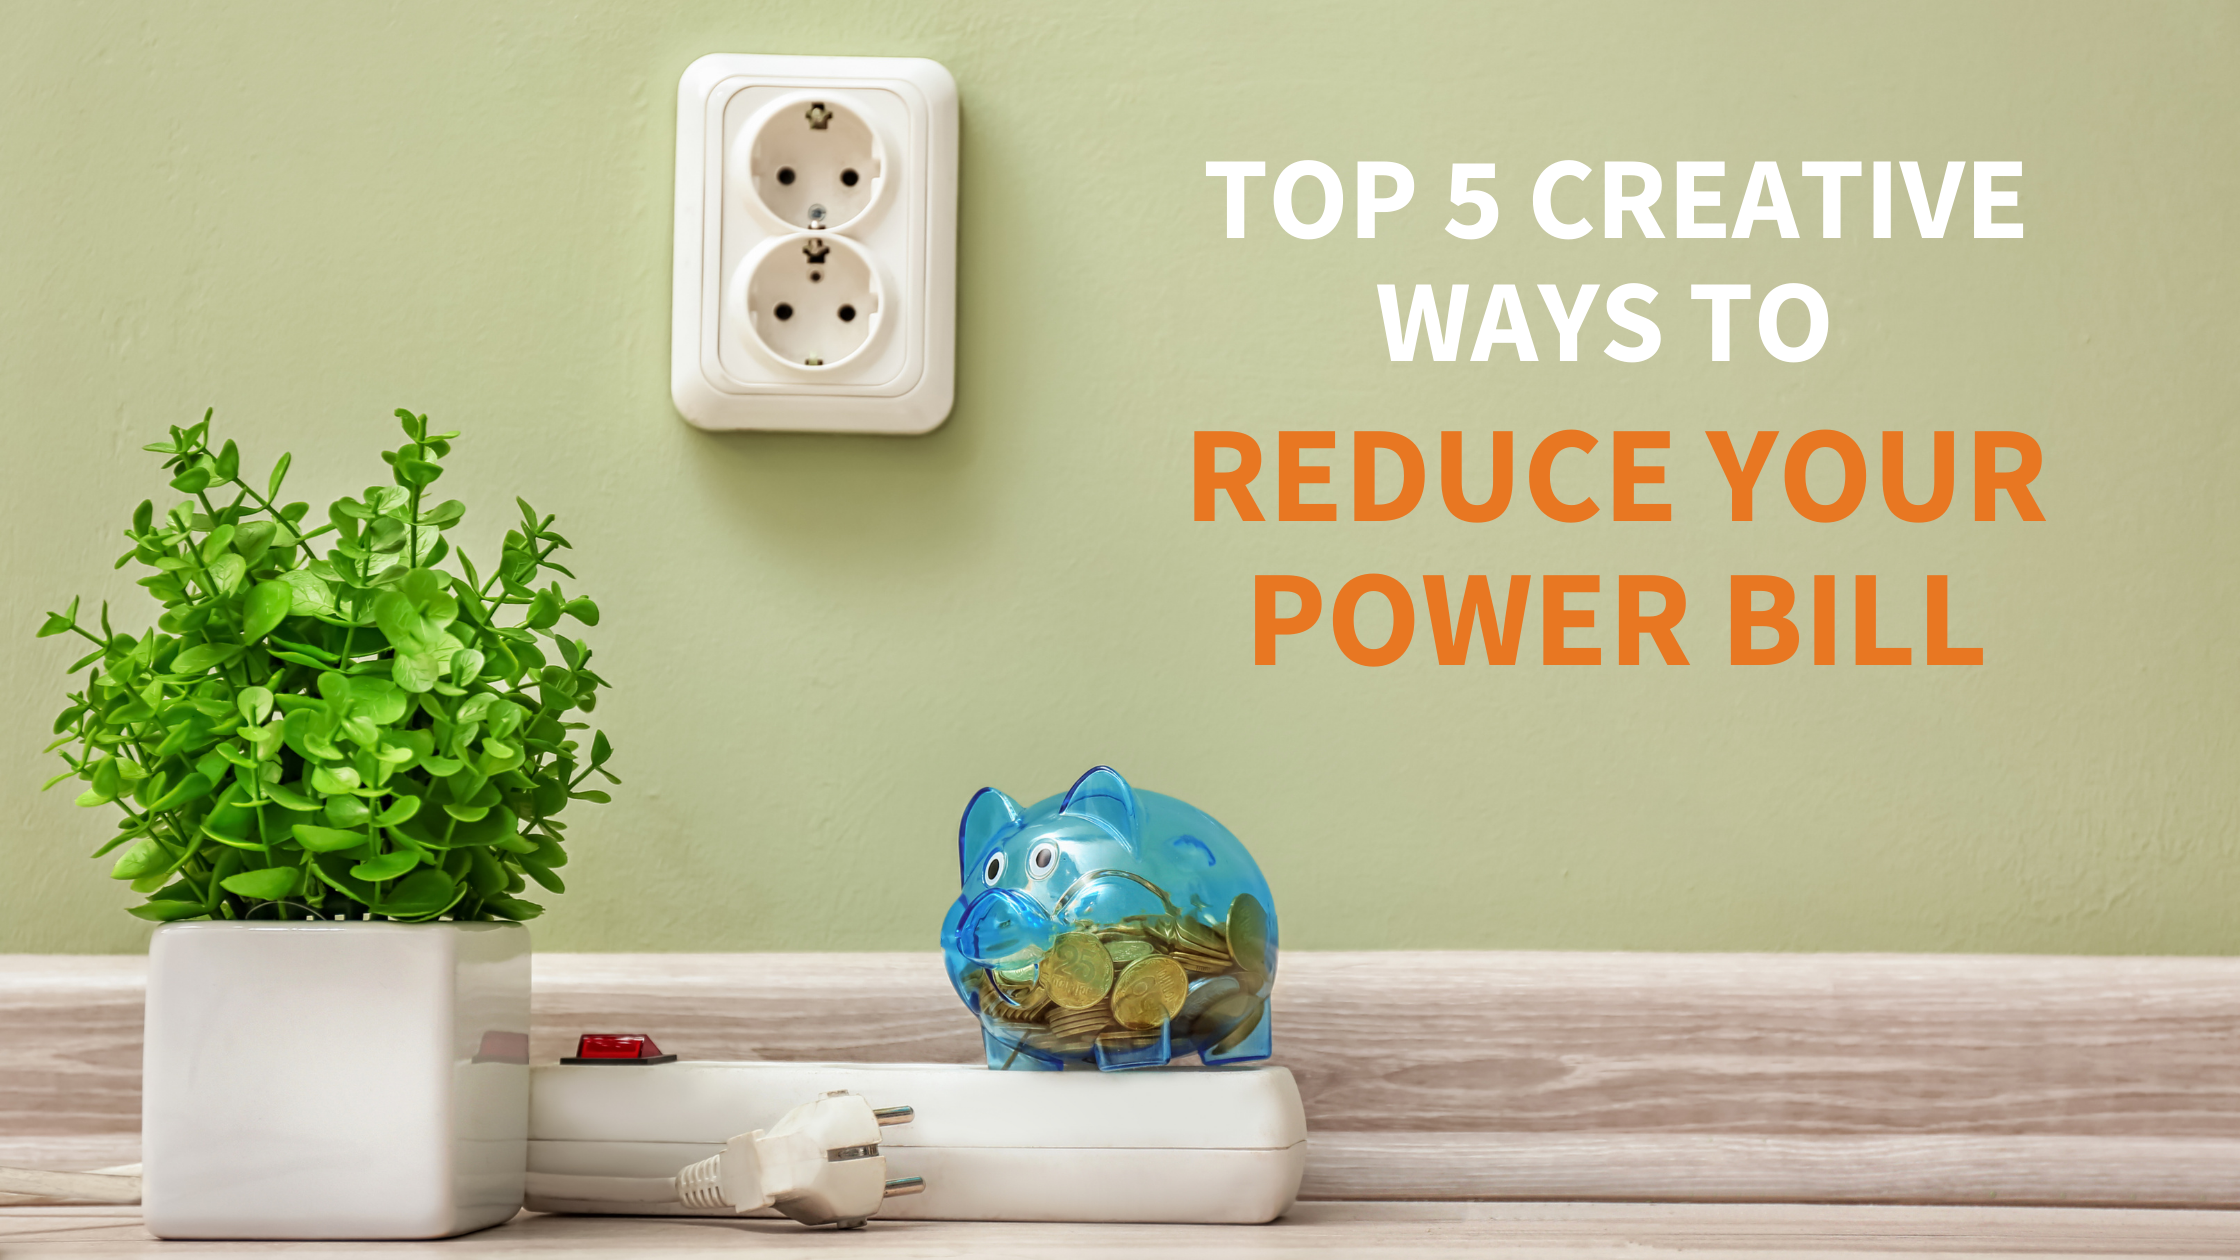 Top 5 Creative Ways to Reduce Your Power Bill 